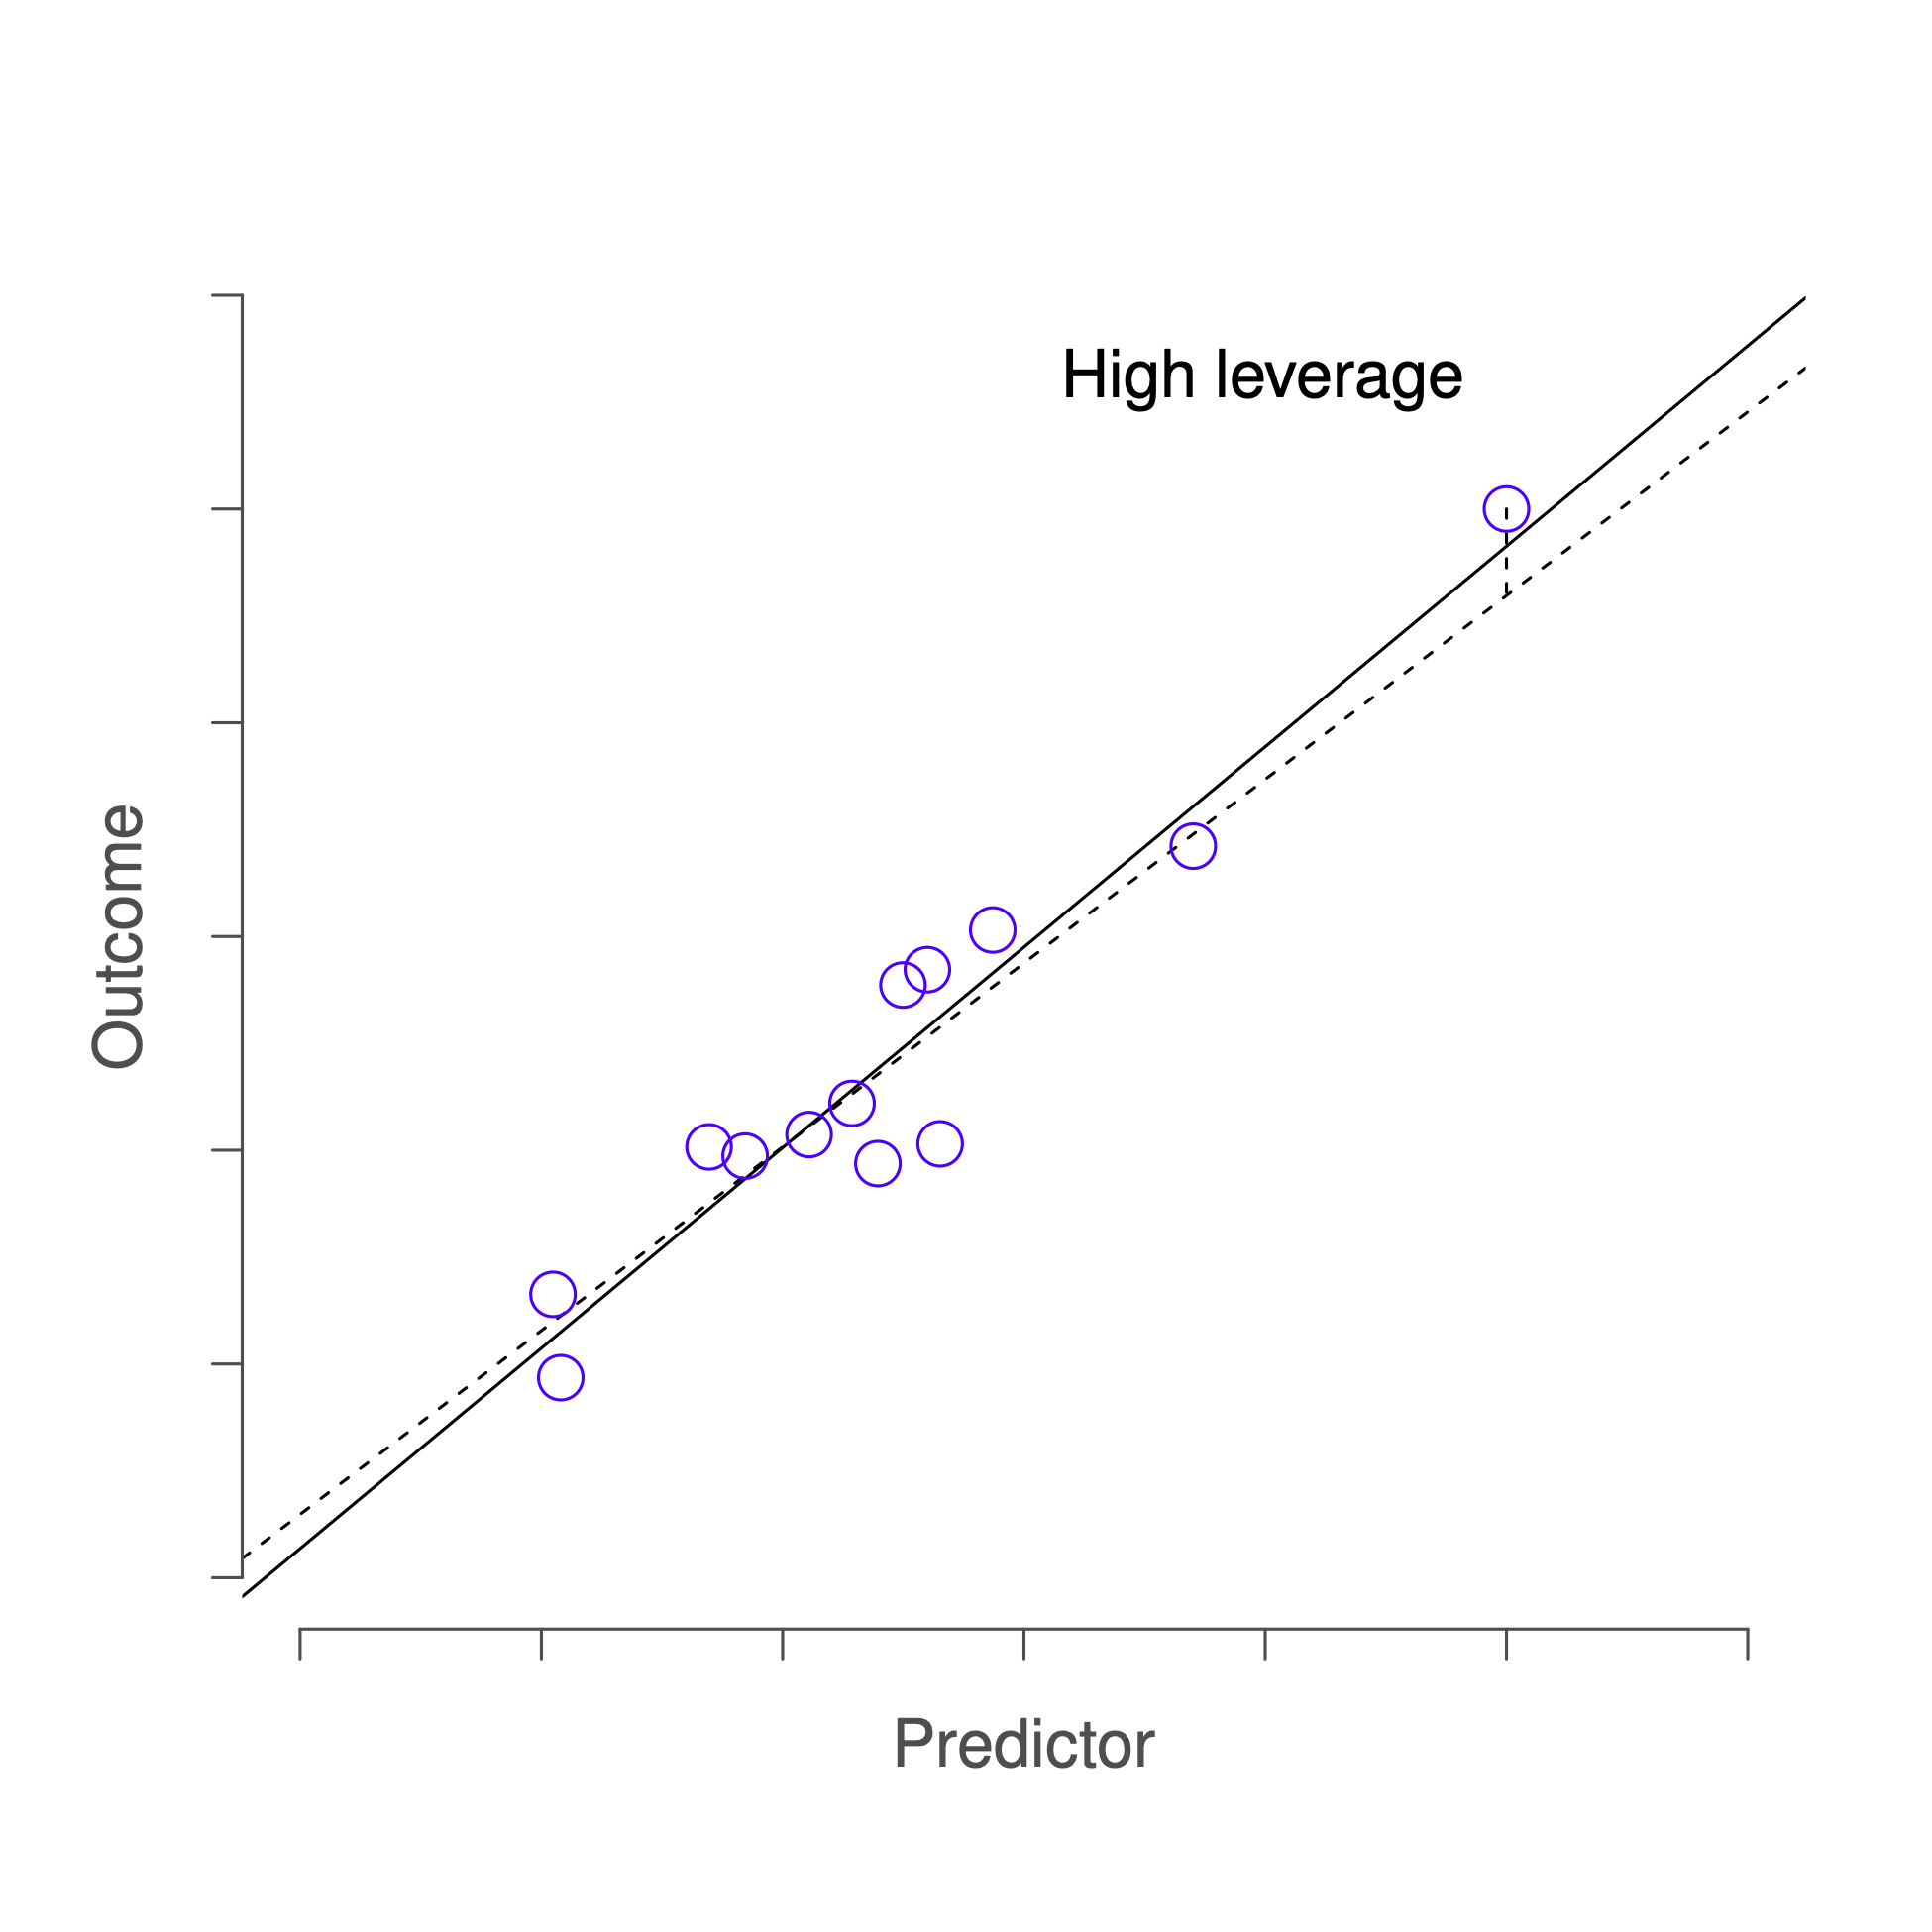 An illustration of high leverage points. The anomalous observation in this case is unusual both in terms of the predictor (x axis) and the outcome (y axis), but this unusualness is highly consistent with the pattern of correlations that exists among the other observations; as a consequence, the observation falls very close to the regression line and does not distort it.